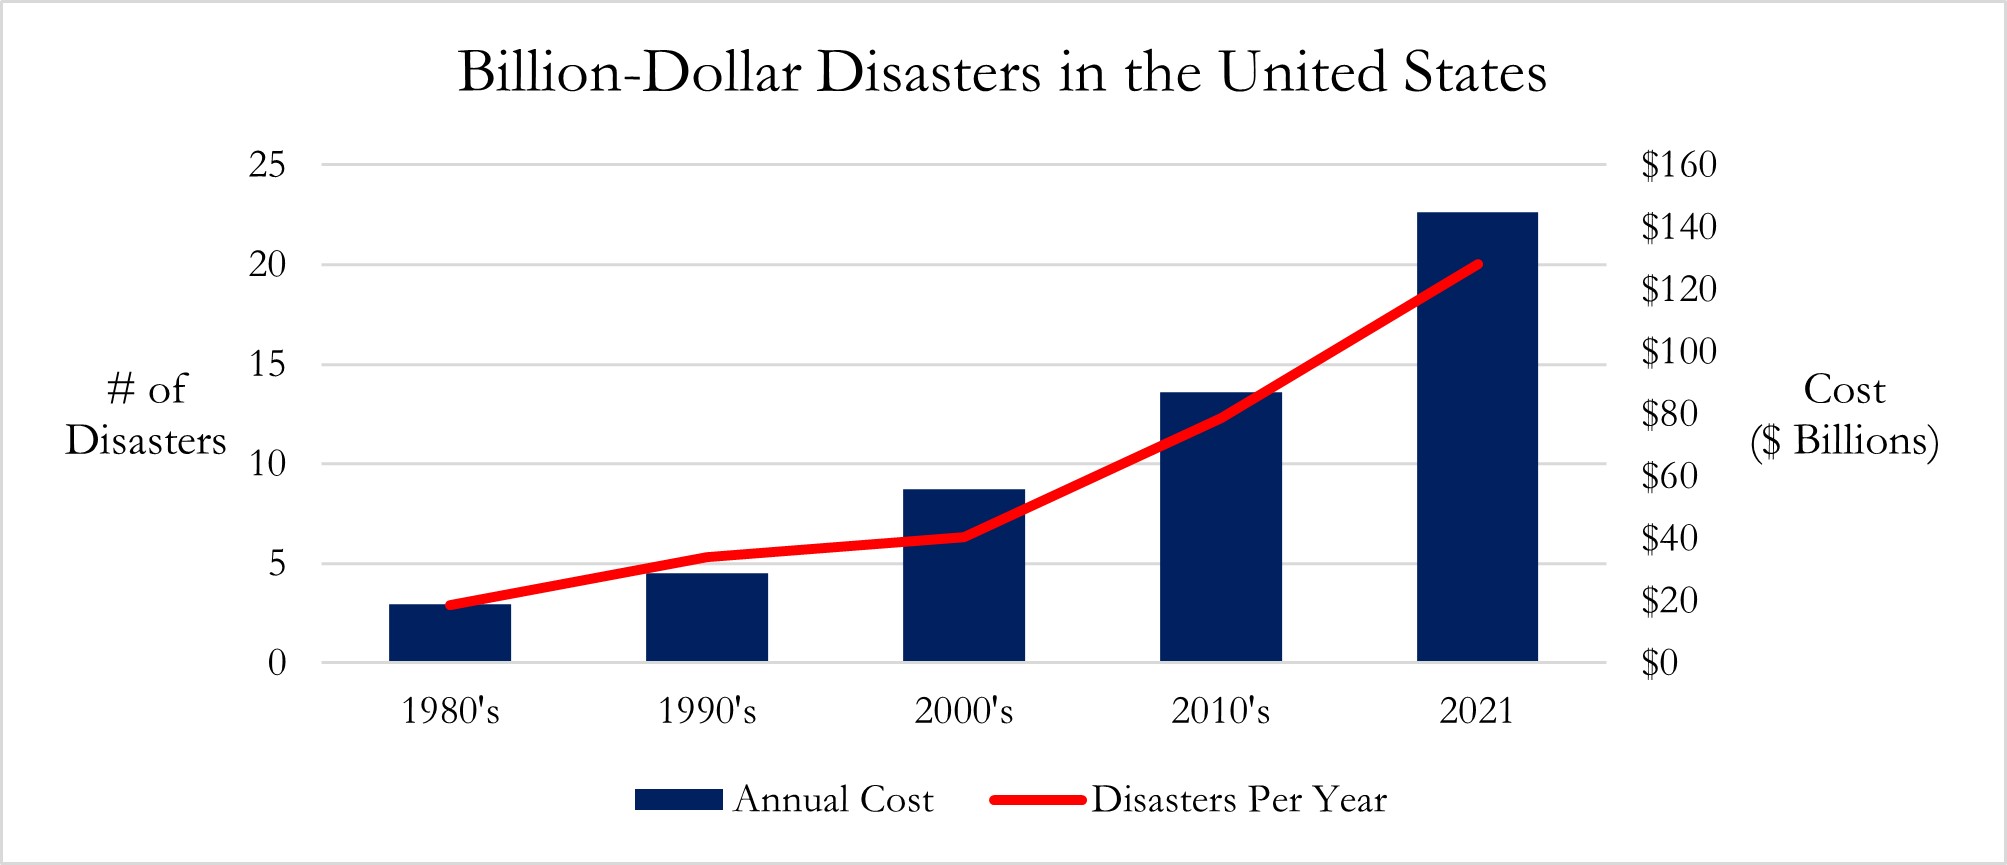 Haverford Trust Graph- "Billion-Dollar Disasters in the United States" - This graph shows an increase in the number of billion dollar disasters starting in the 1980's. In 2021 the United States has accumulated about 23 disasters at the cost of $150 billion.